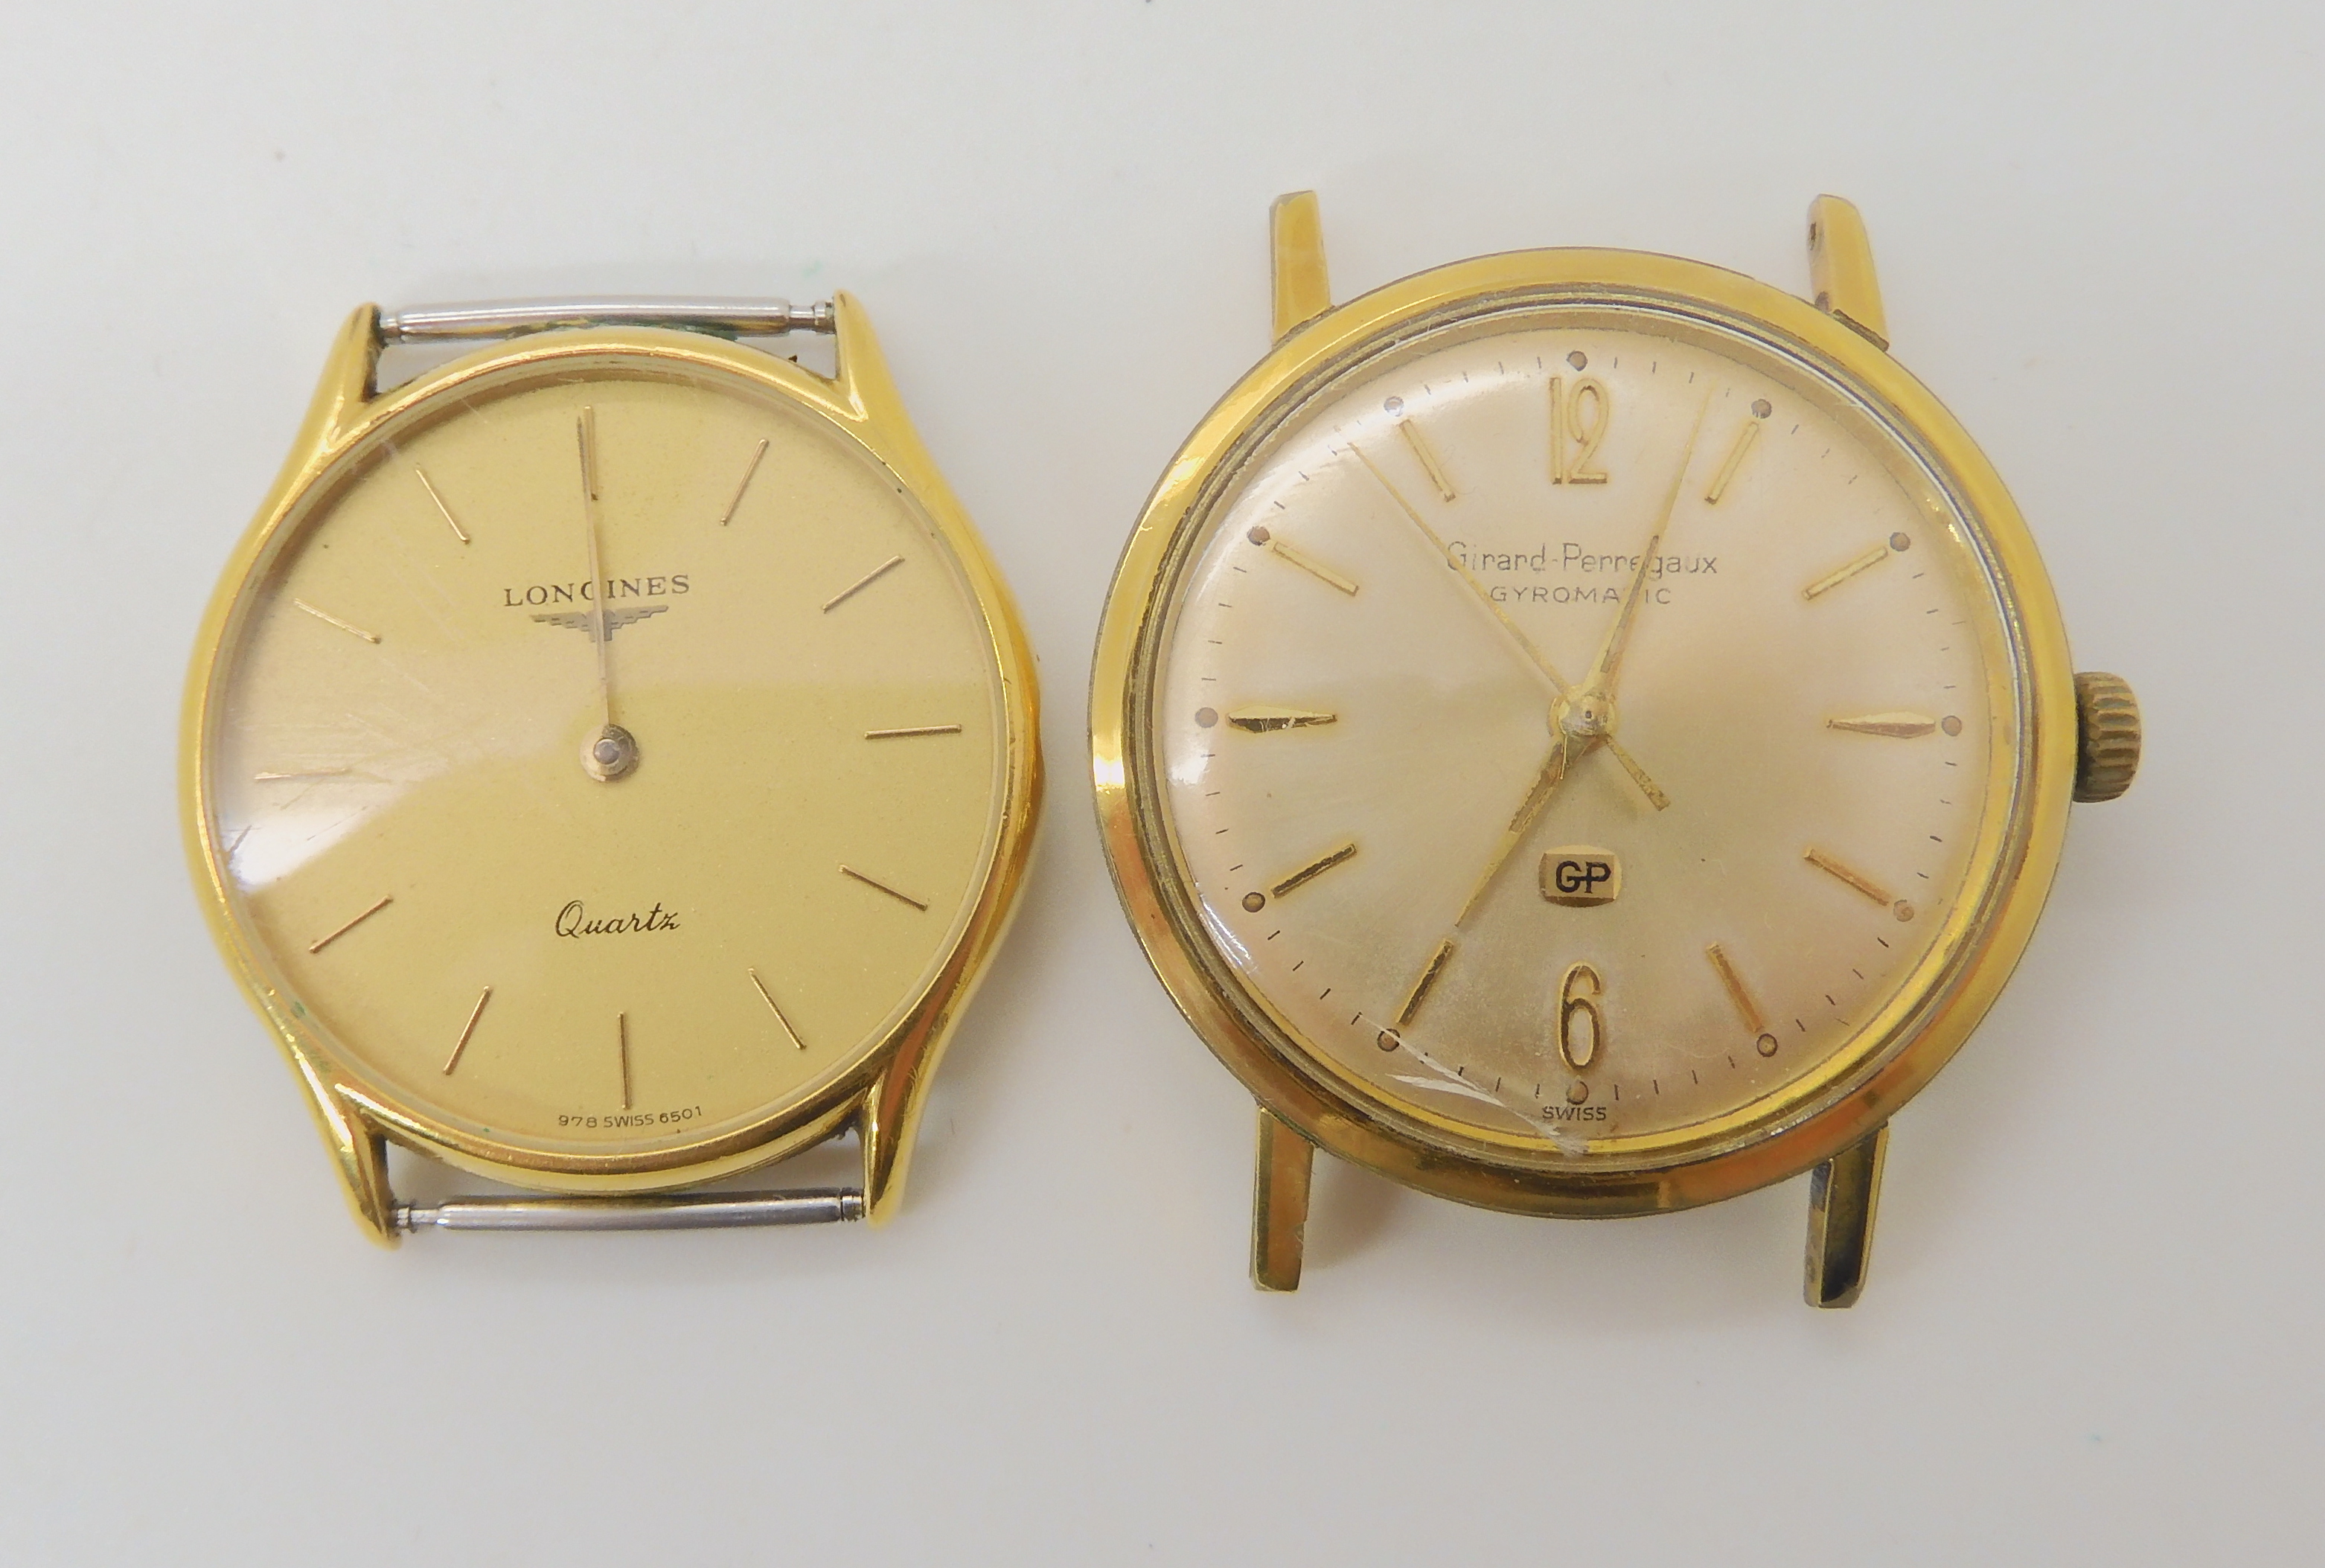 GIRARD PERREGAUX WATCH HEAD AND A LONGINES a gold plated Girard Peregaux Giromatic, with a cream